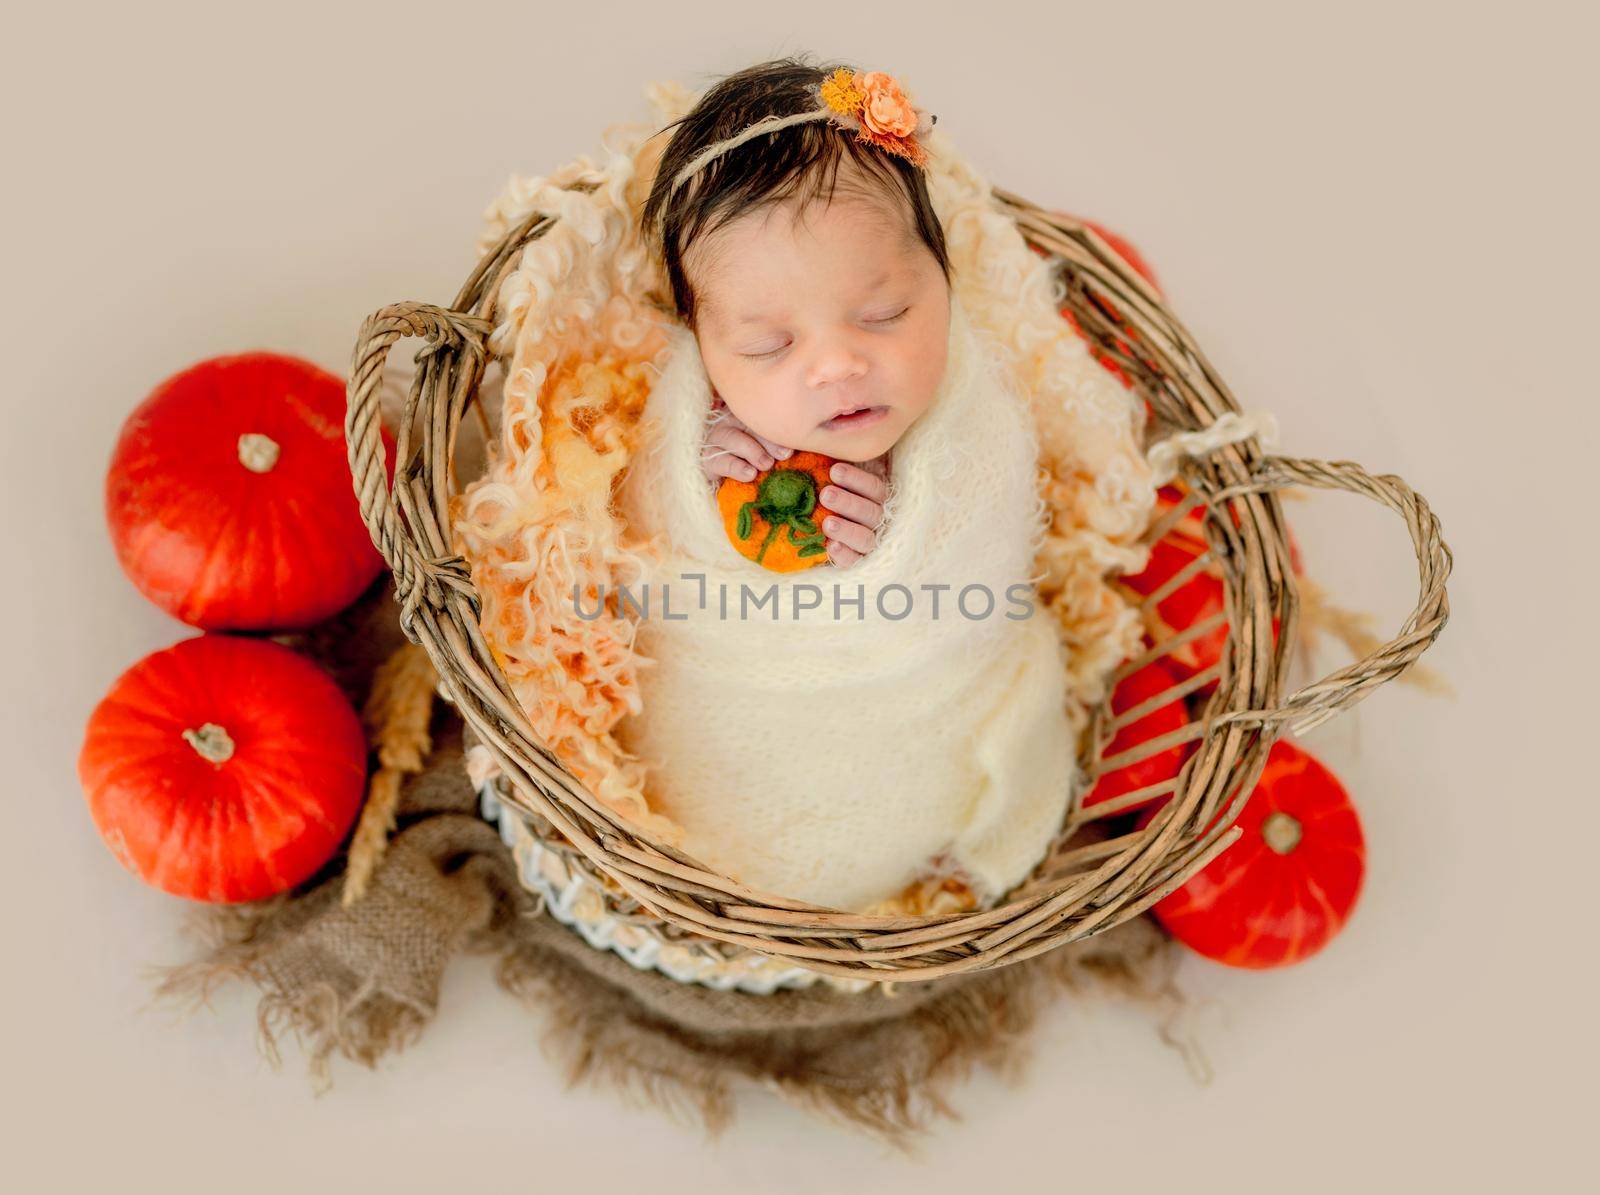 Newborn baby girl sleeping in wicker basket decorated pumpkins and holding knitted toy. Cute infant child kid studio portrait